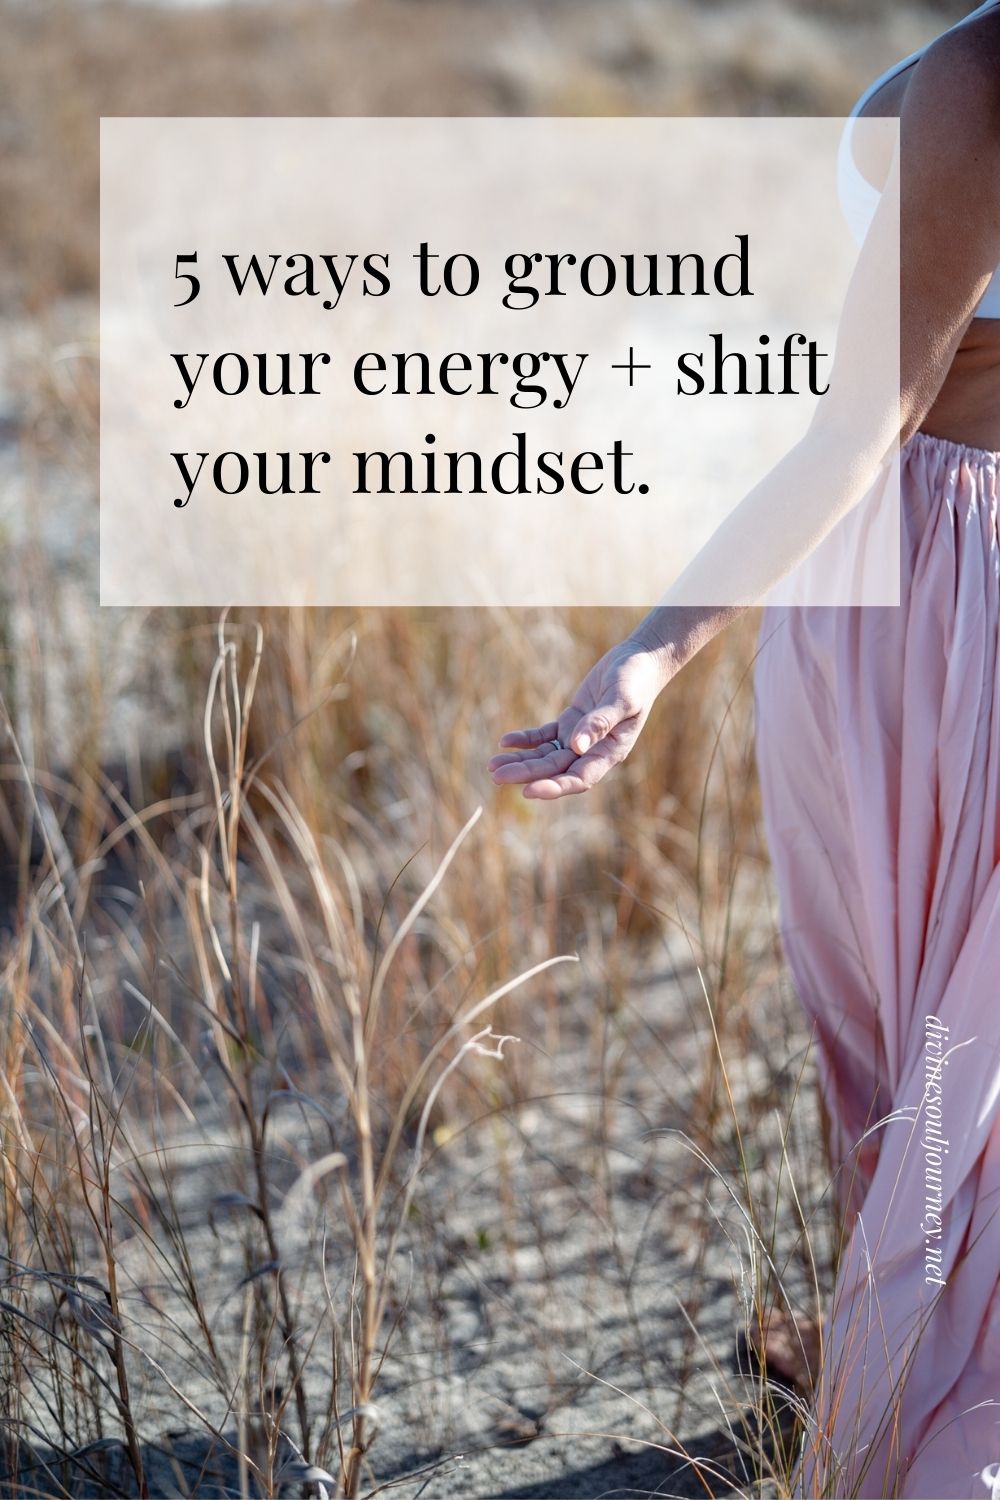 shift-your-mindset-ground-your-energy